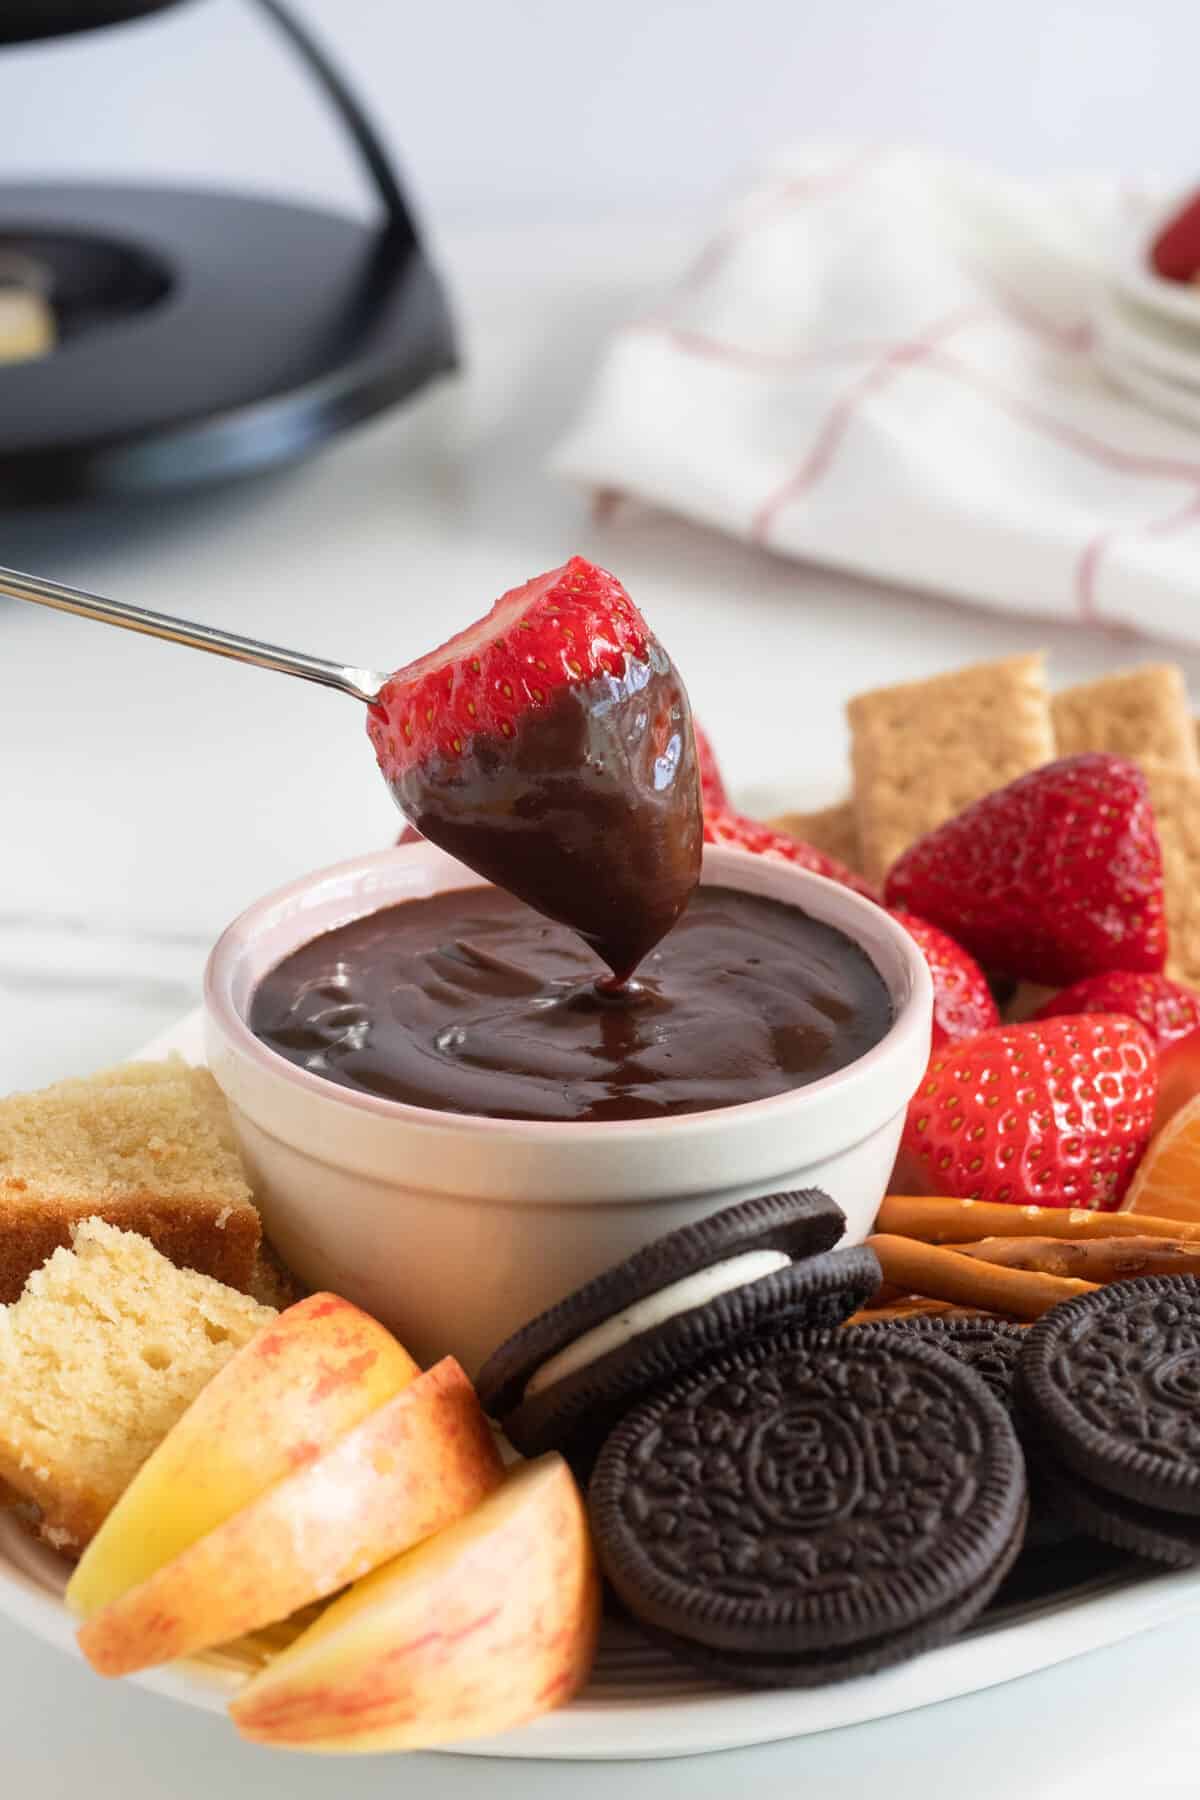 a strawberry being dipped in chocolate fondue 